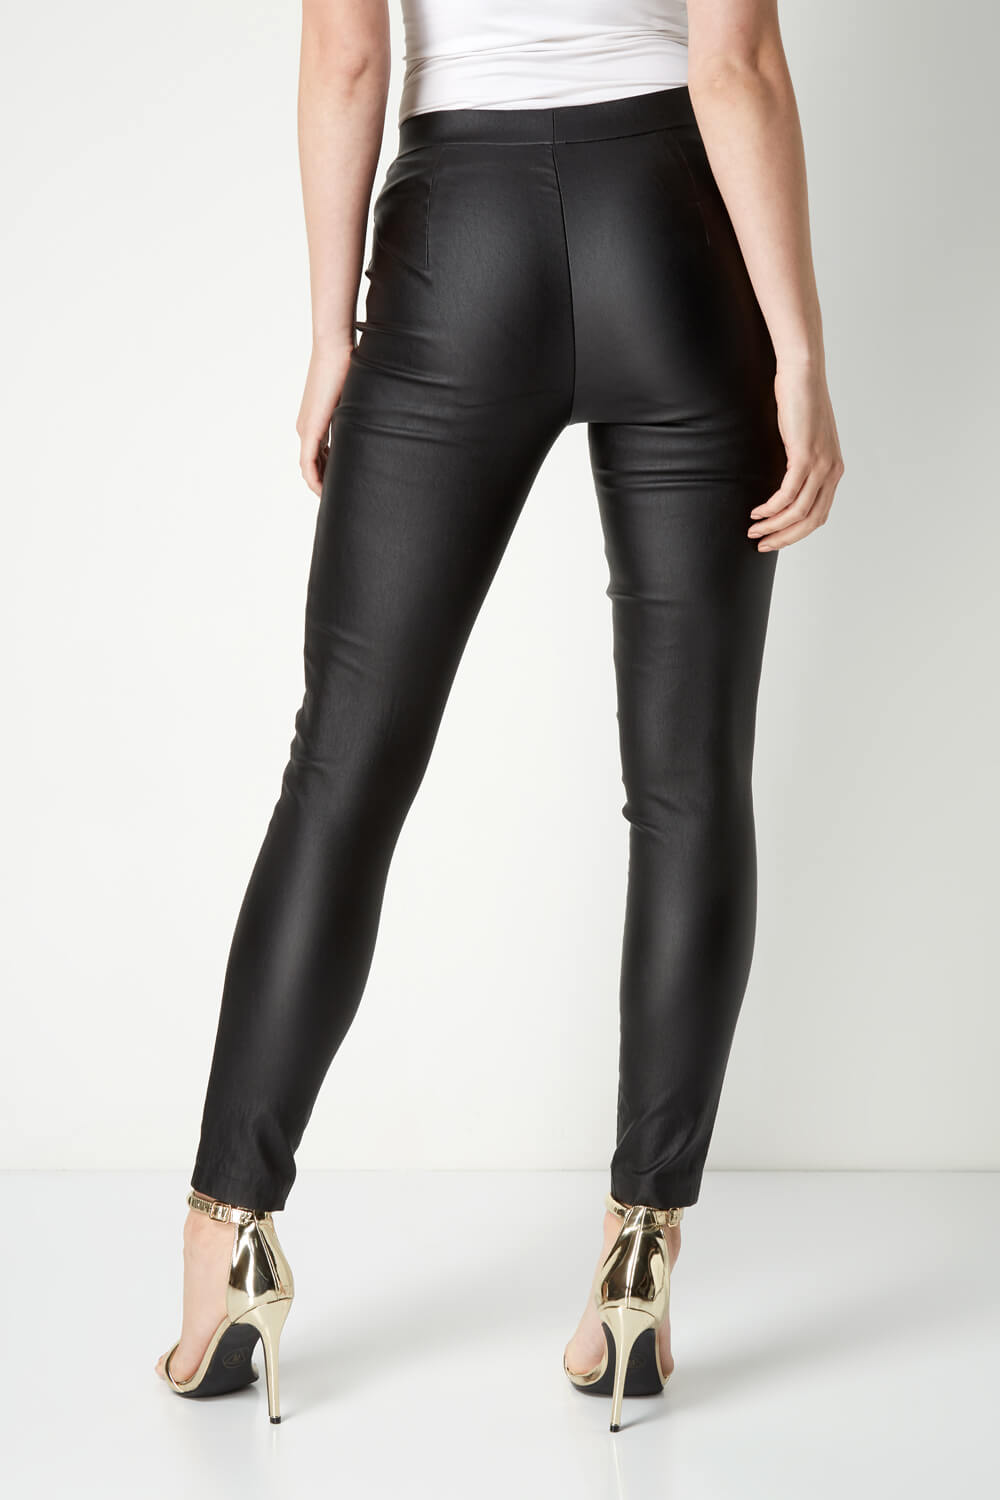 Black Pull On Faux Leather Tall Trousers, Image 2 of 4